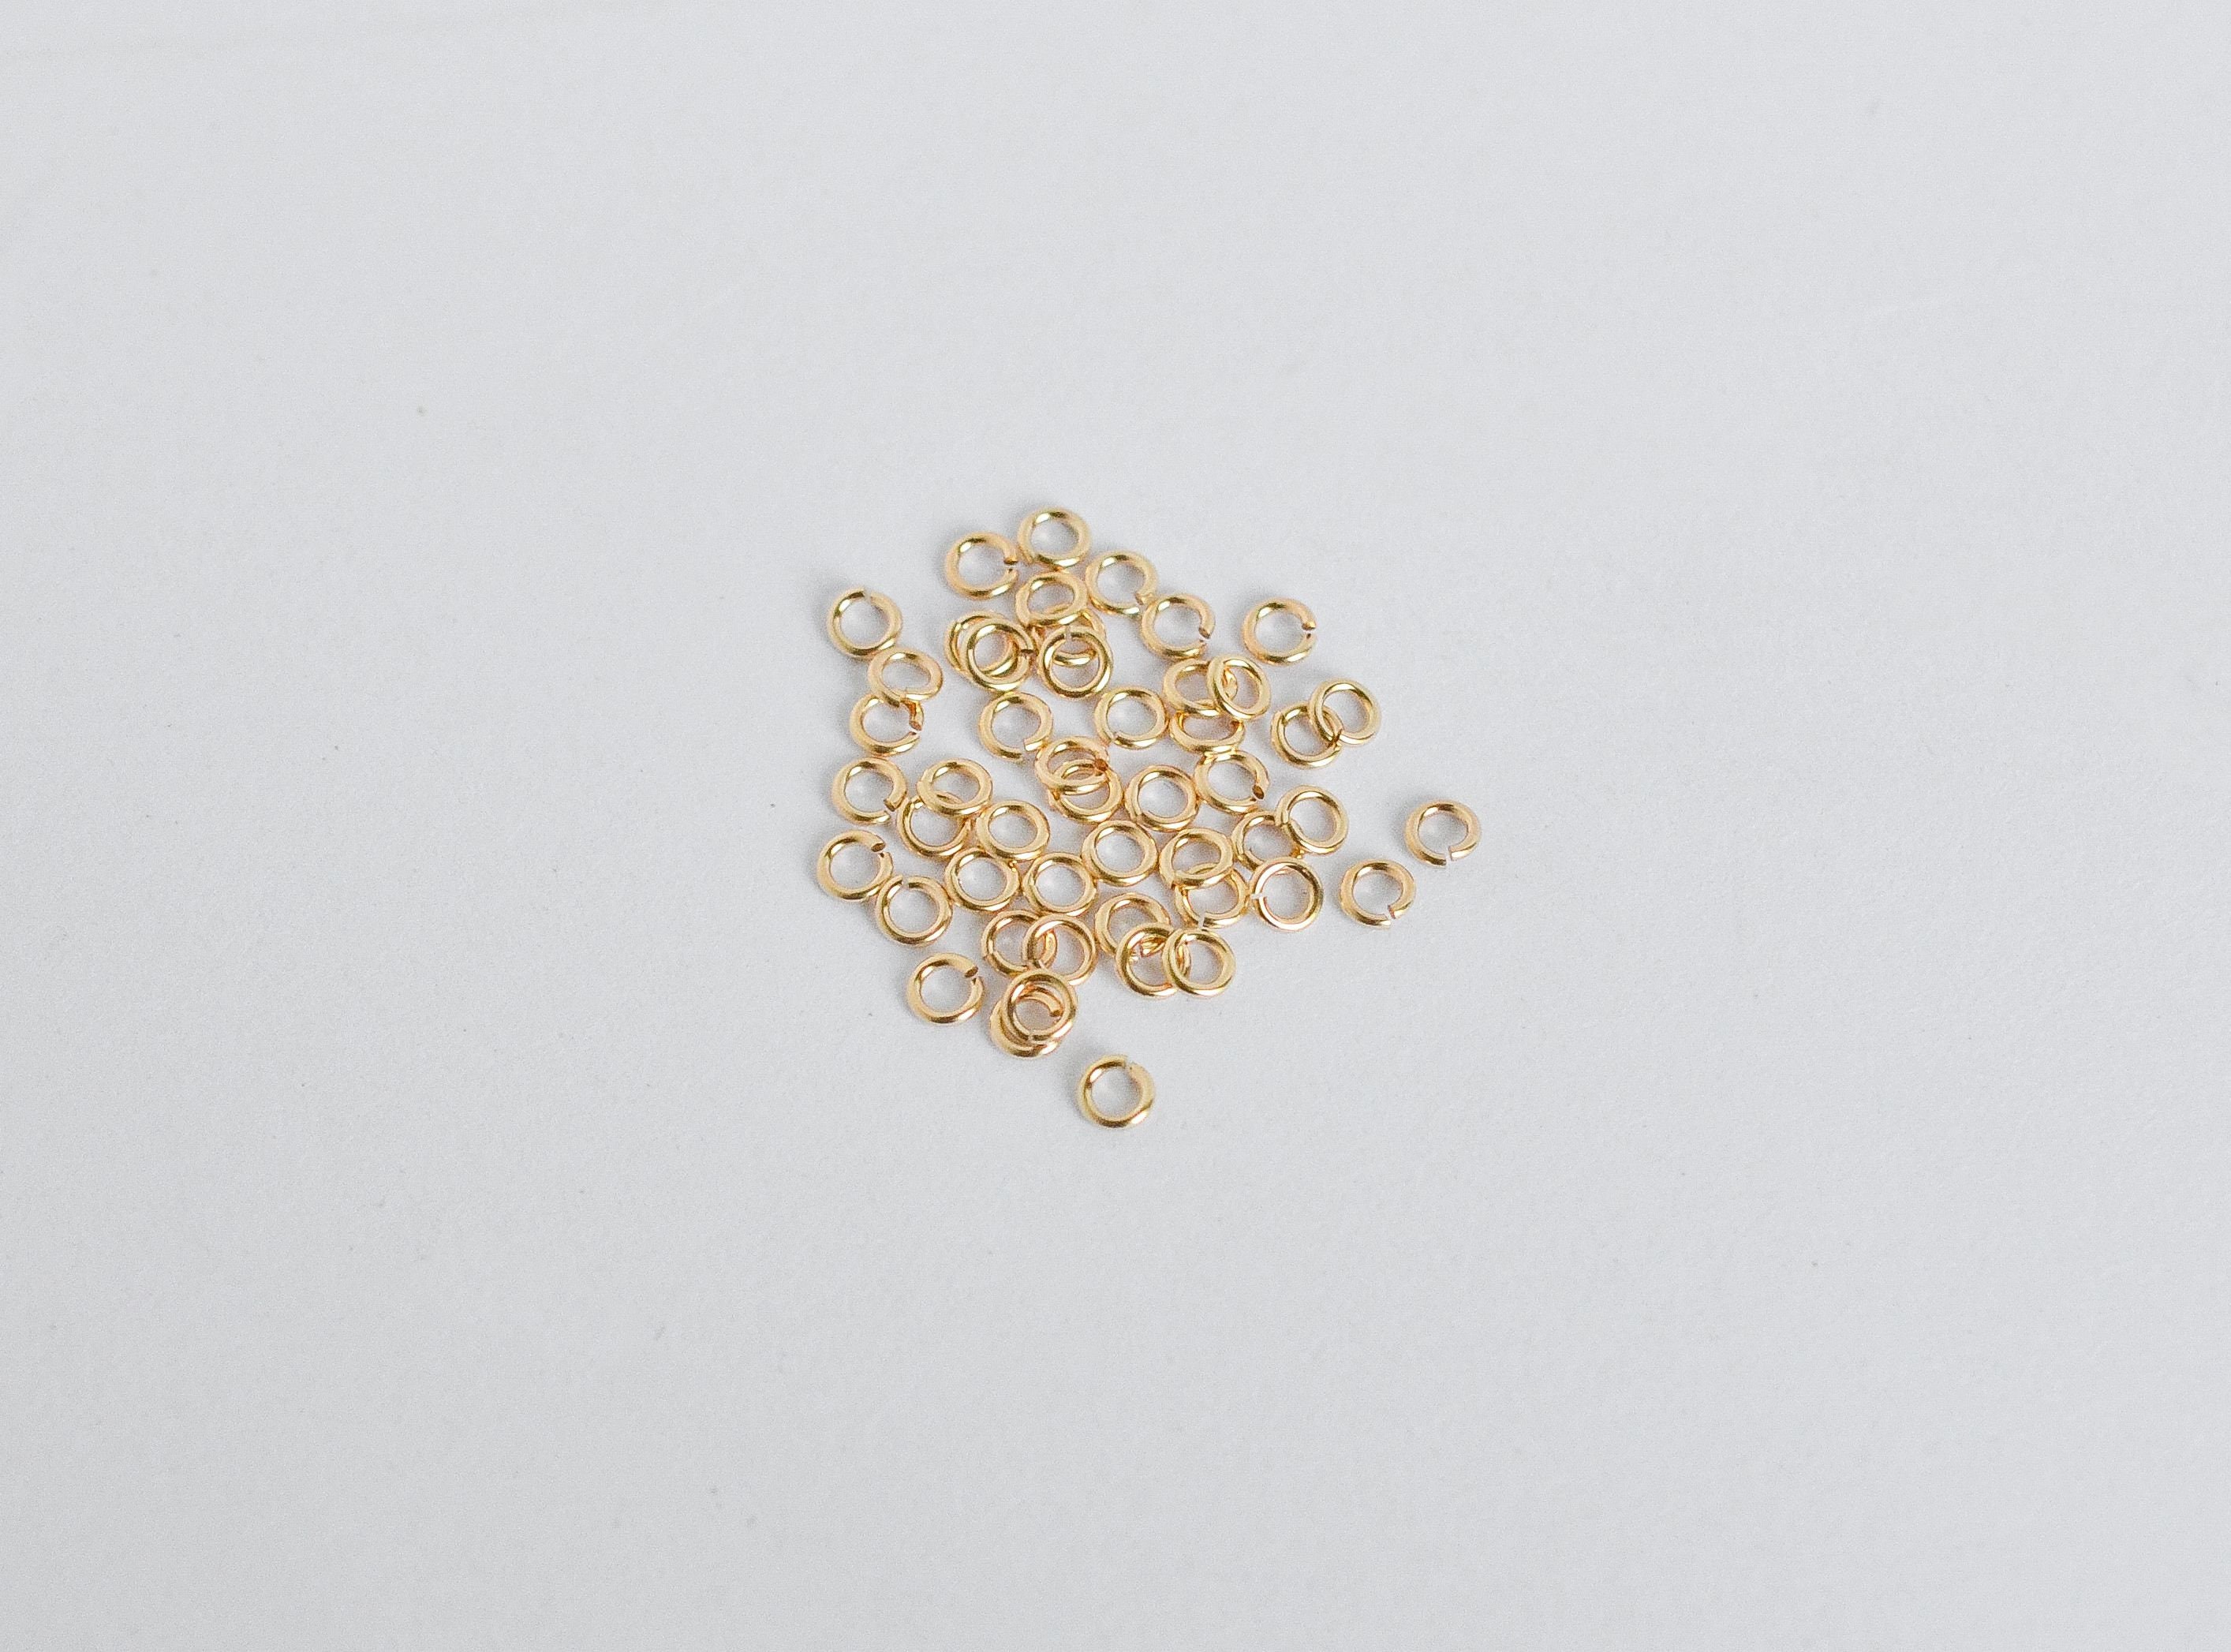 Wholesale 4mm 22ga Click &a Lock Jump Rings 14kt Gold Filled